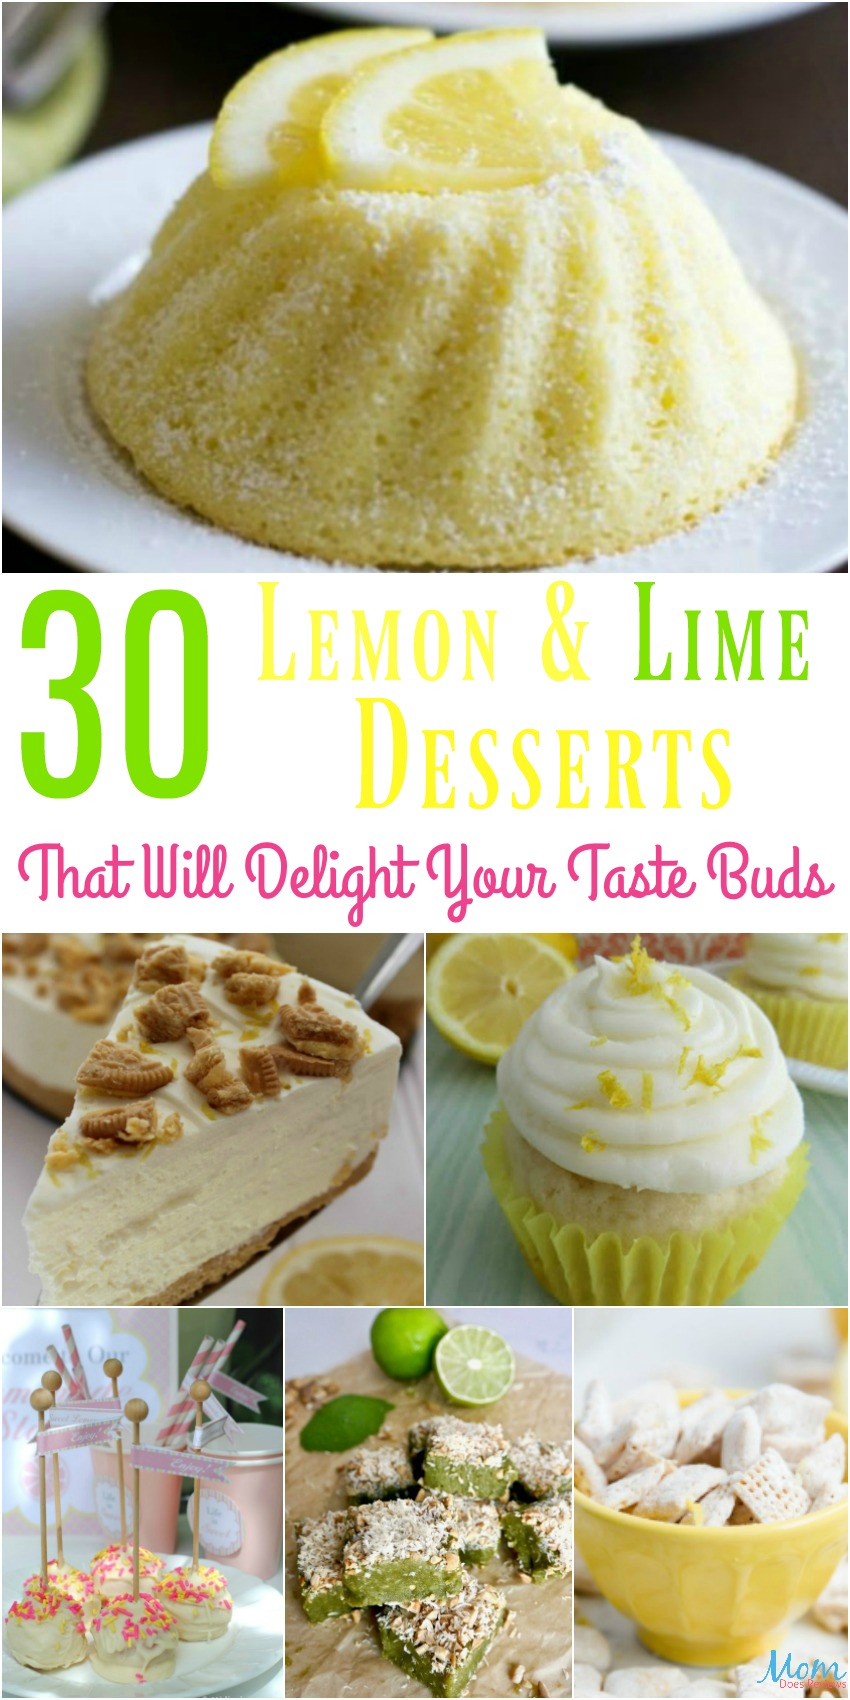 30 Lemon and Lime Desserts That Will Delight Your Taste Buds {Part 2}